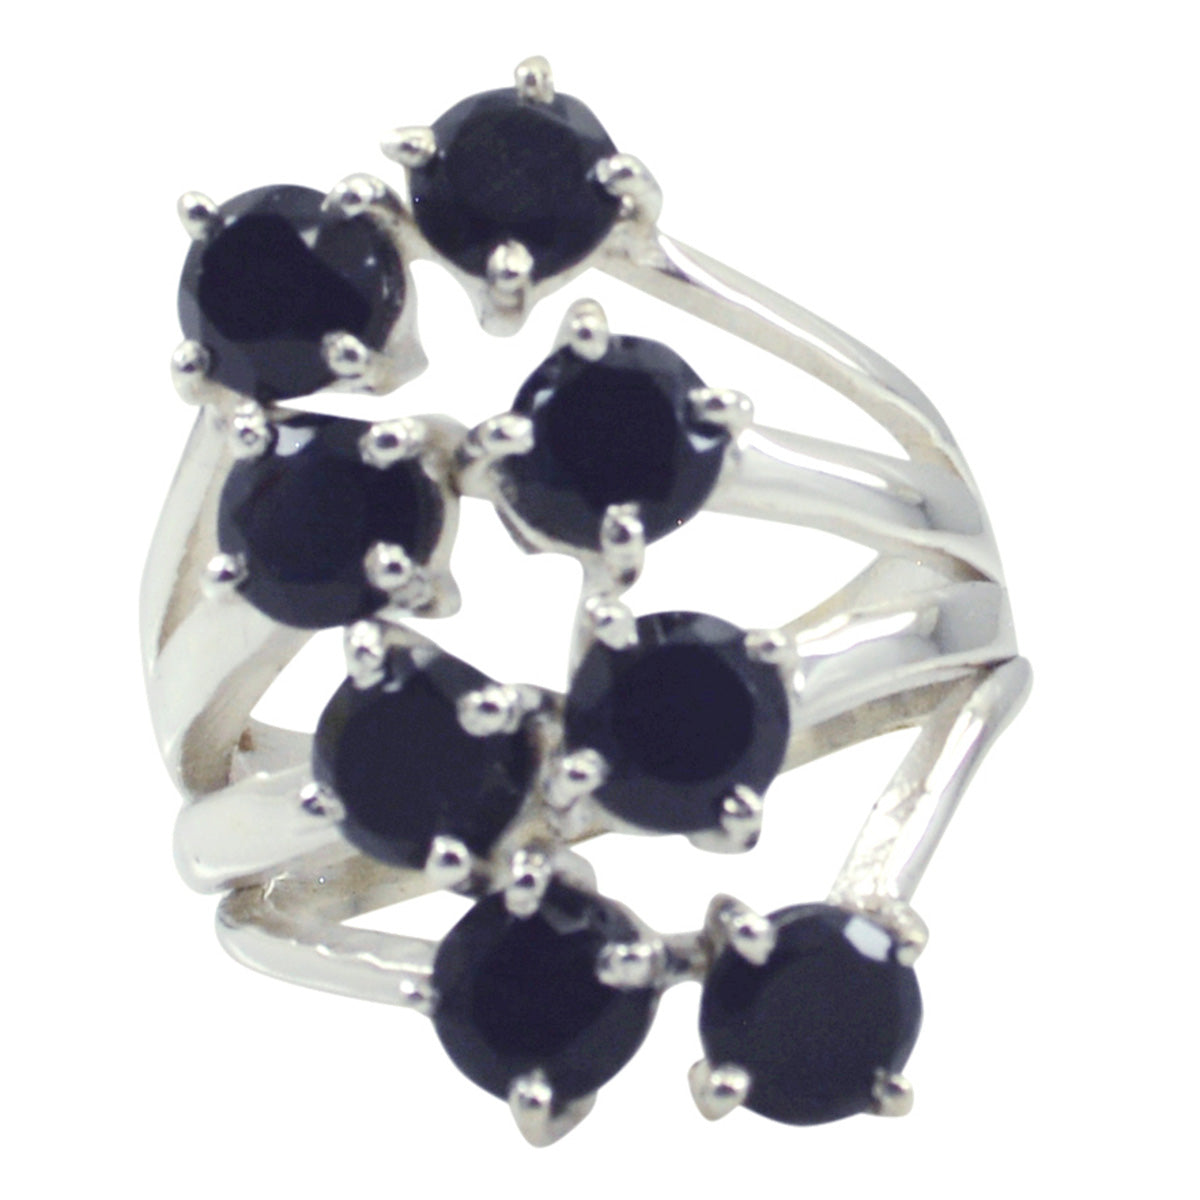 Well-Formed Gemstones Black Onyx Sterling Silver Ring Jewelry Channel